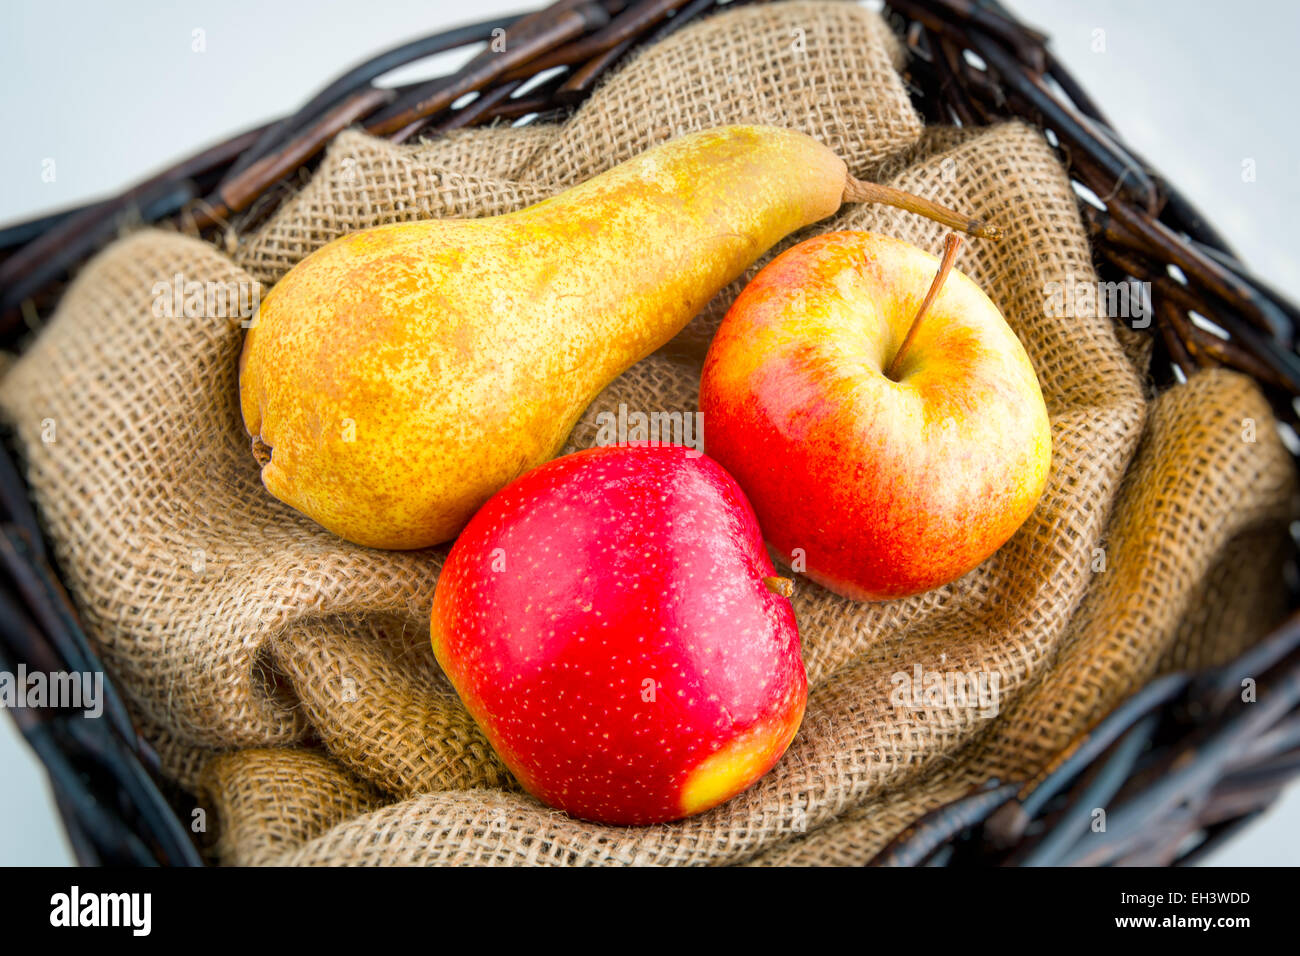 Two apples and pear in a wicker basket Stock Photo